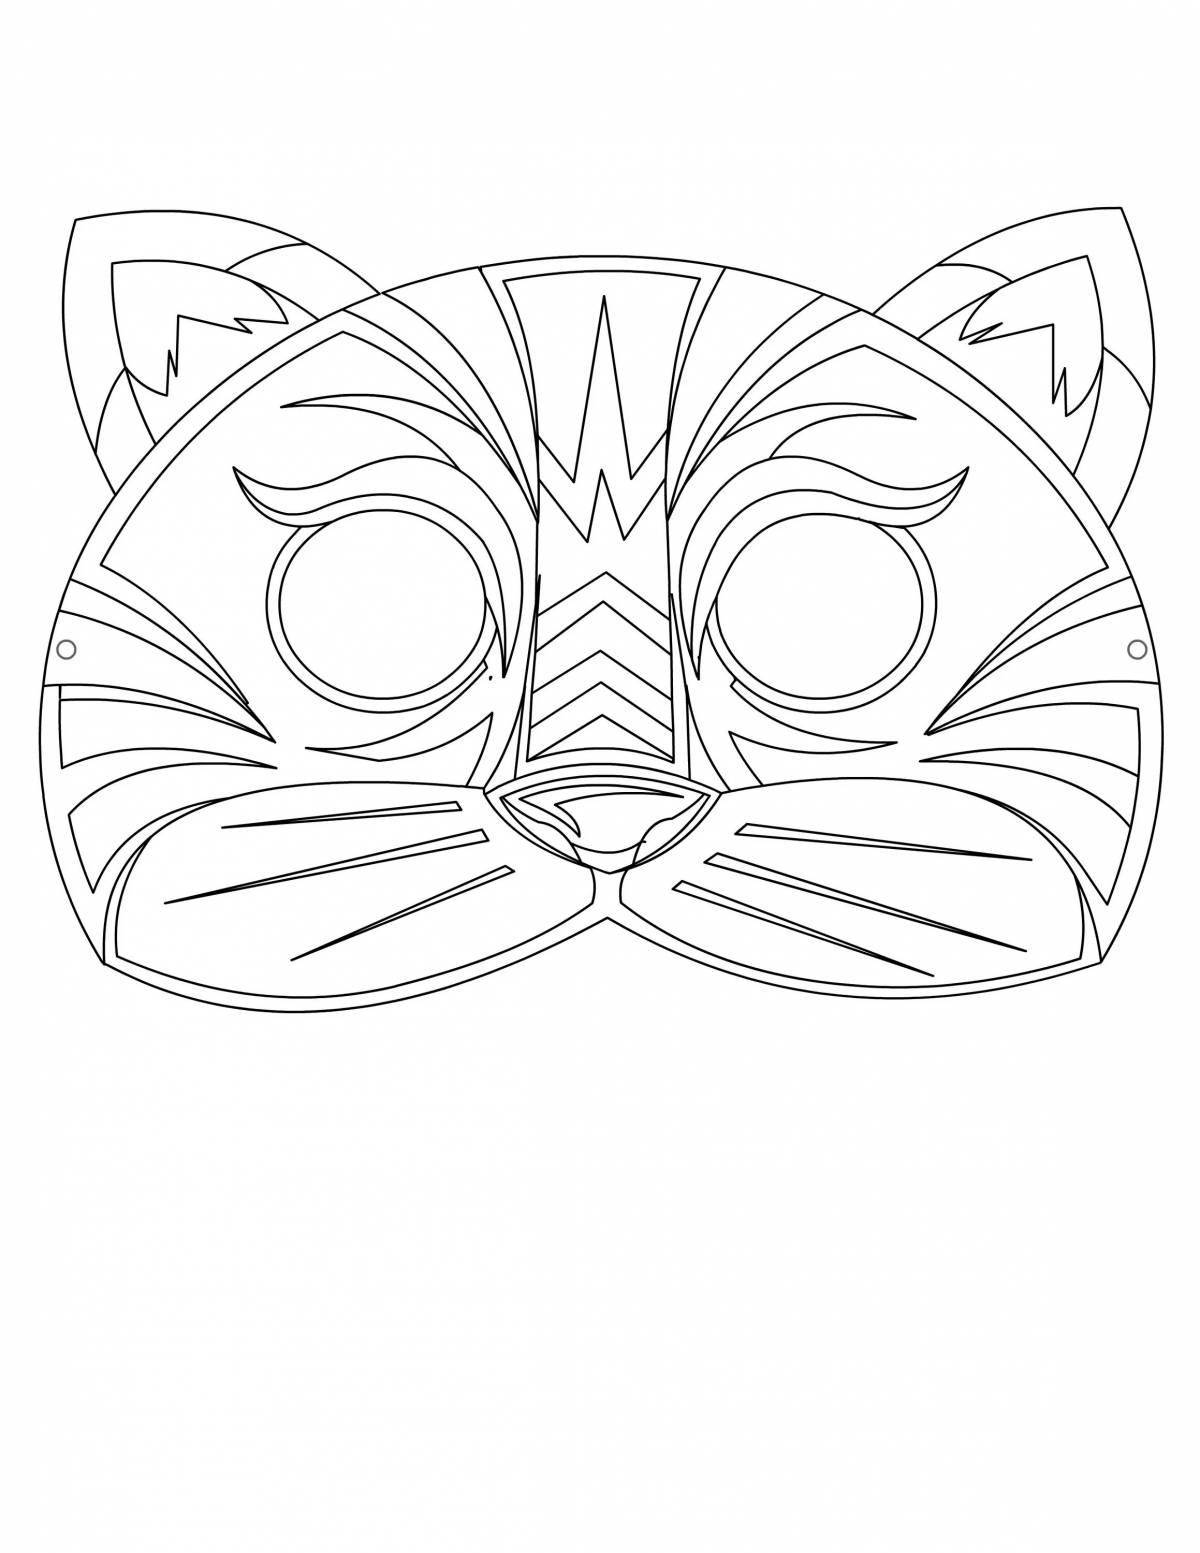 Coloring page cozy cat mask